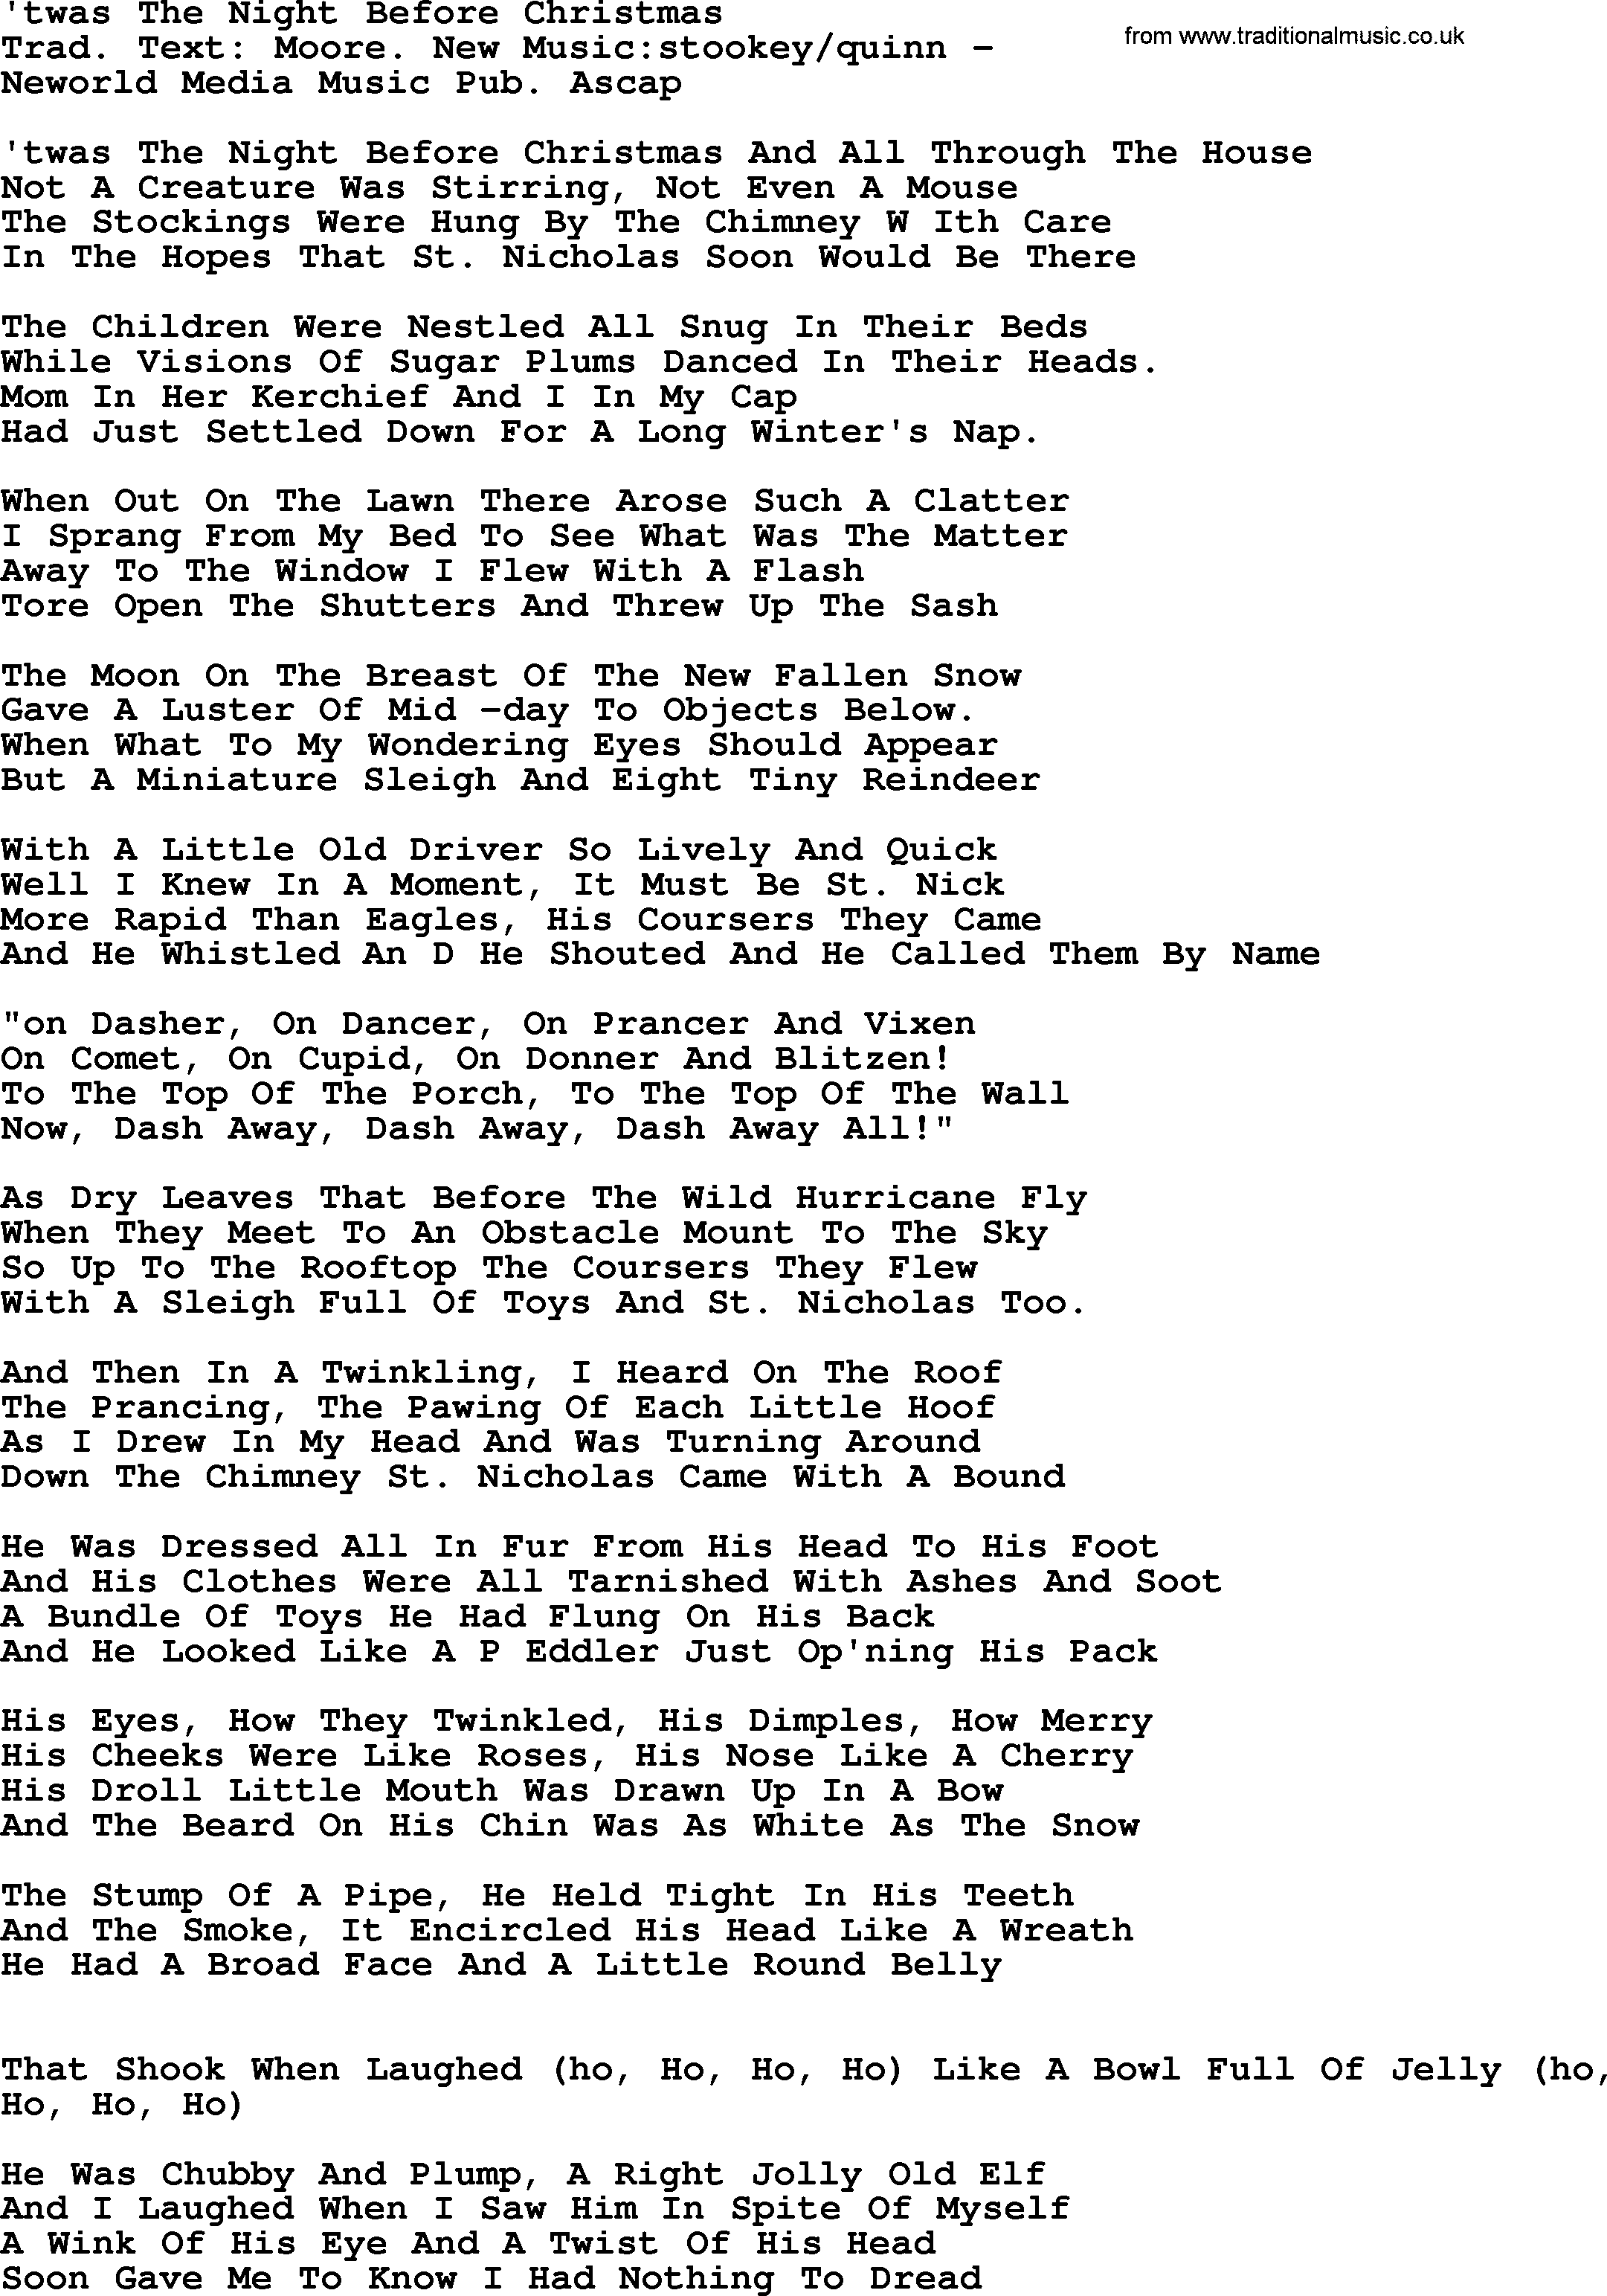 Peter, Paul and Mary song Twas The Night Before Christmas, lyrics and chords